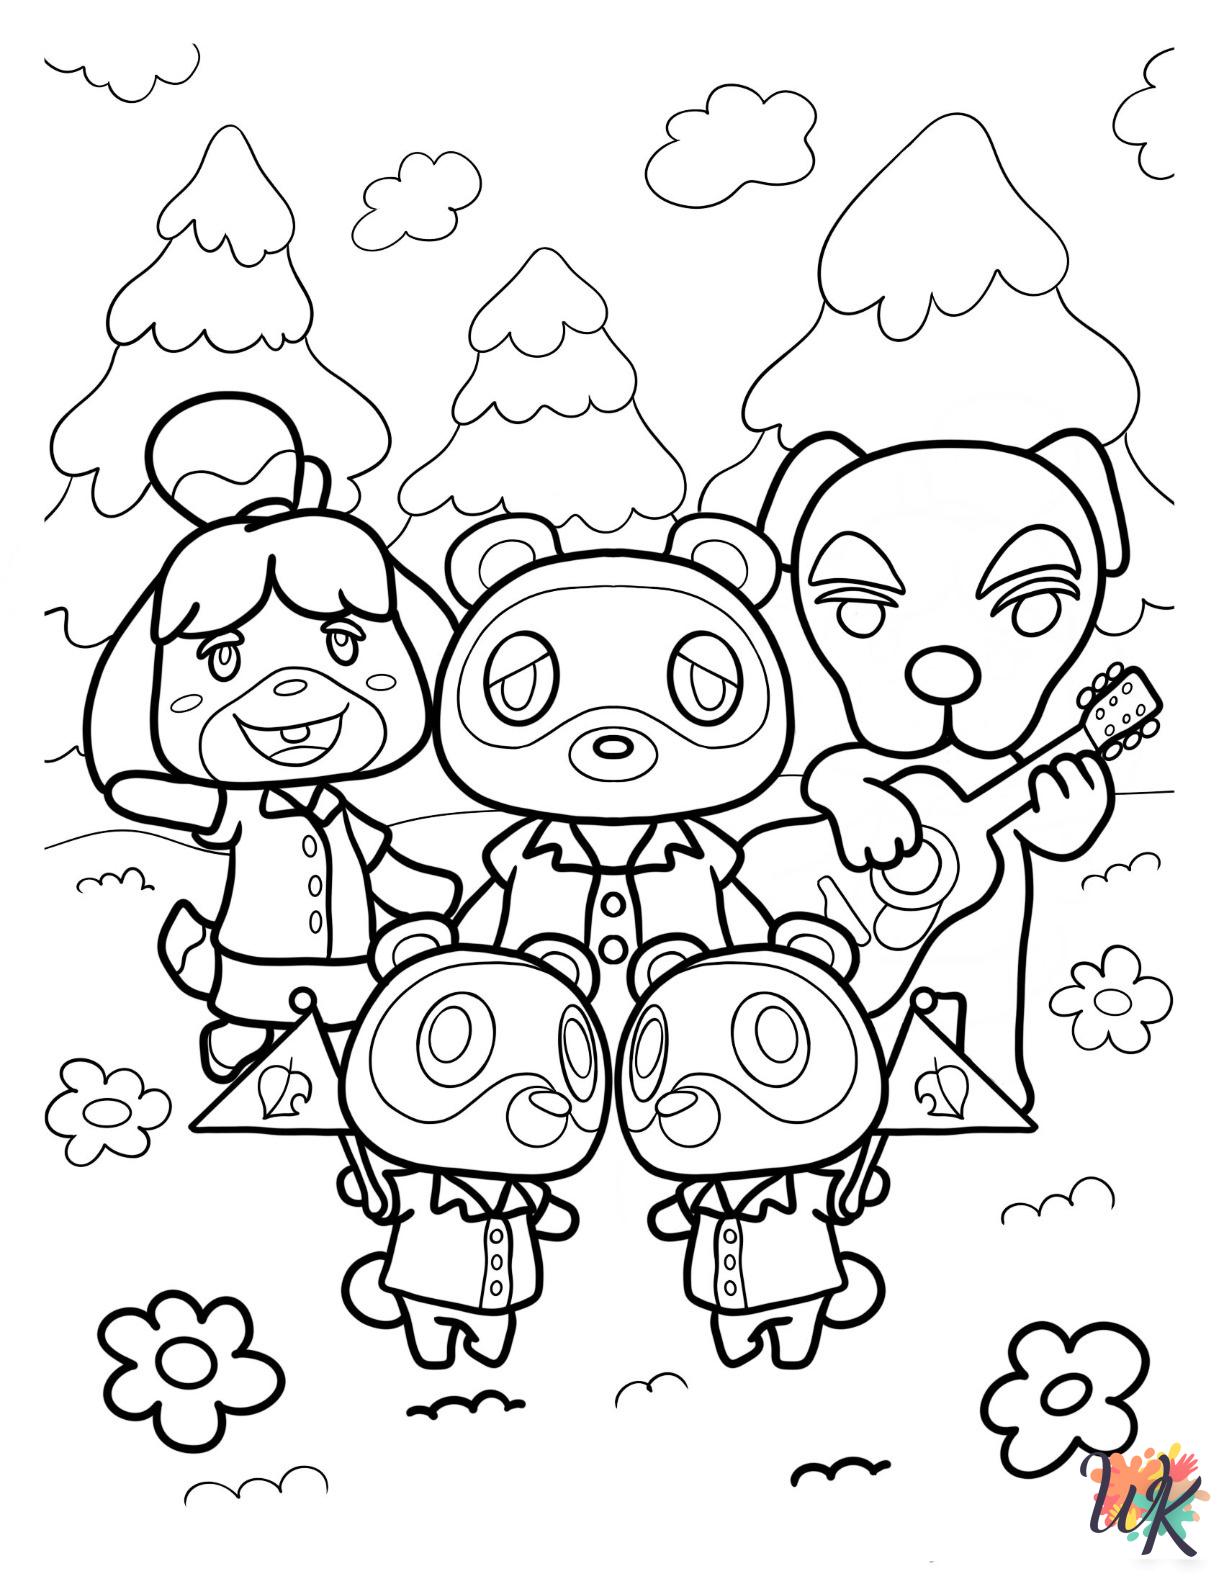 coloring pages for kids Animal Crossing